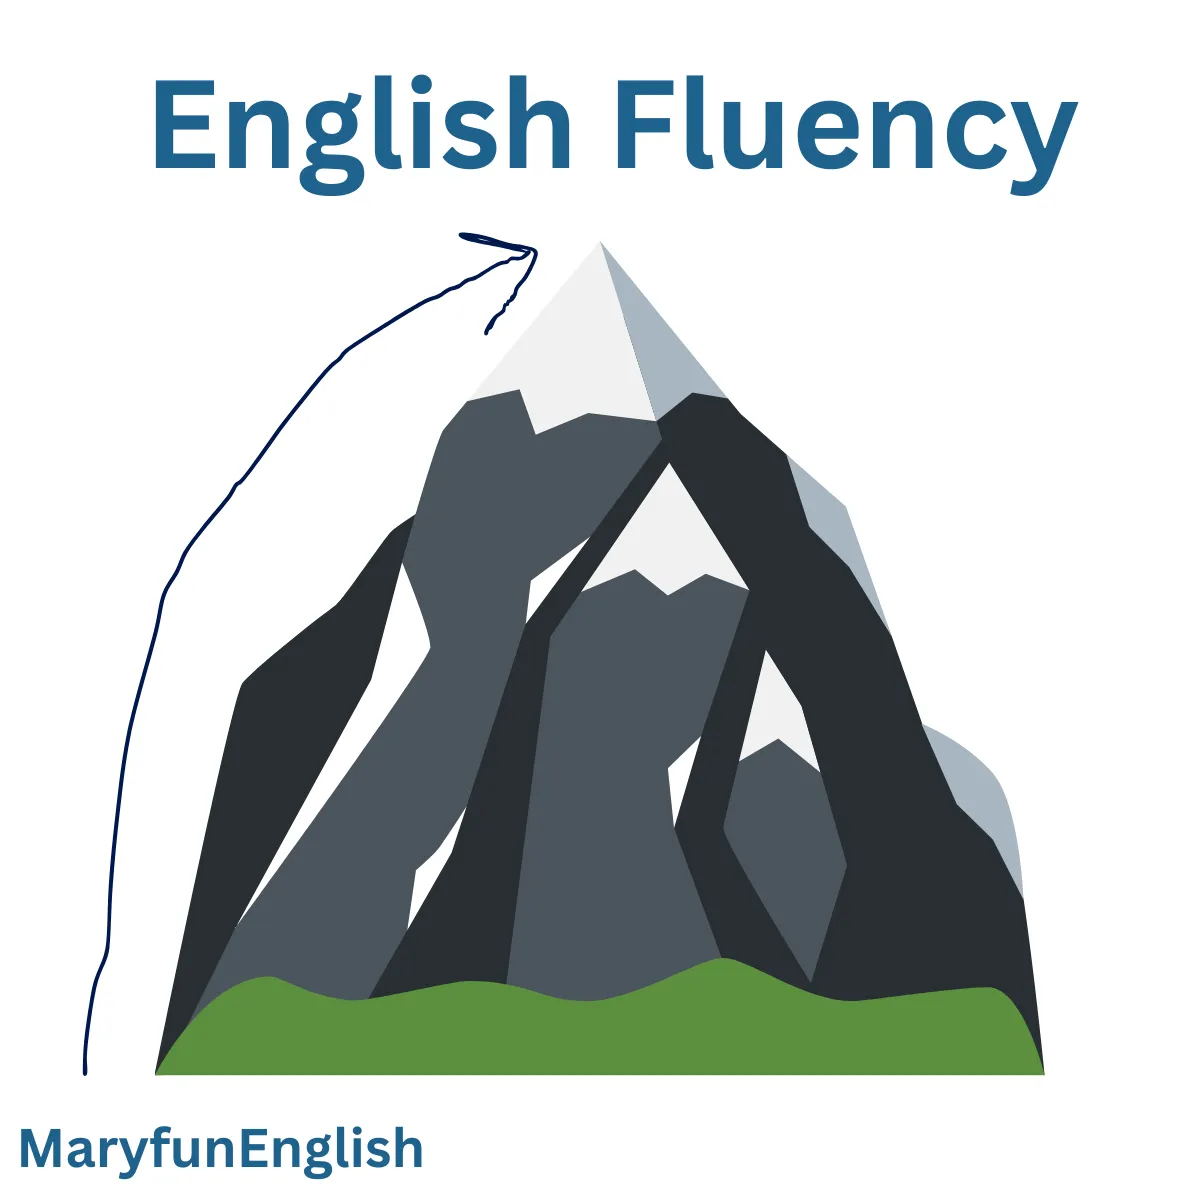 English Learning: a One-Way Ticket to English Fluency Please